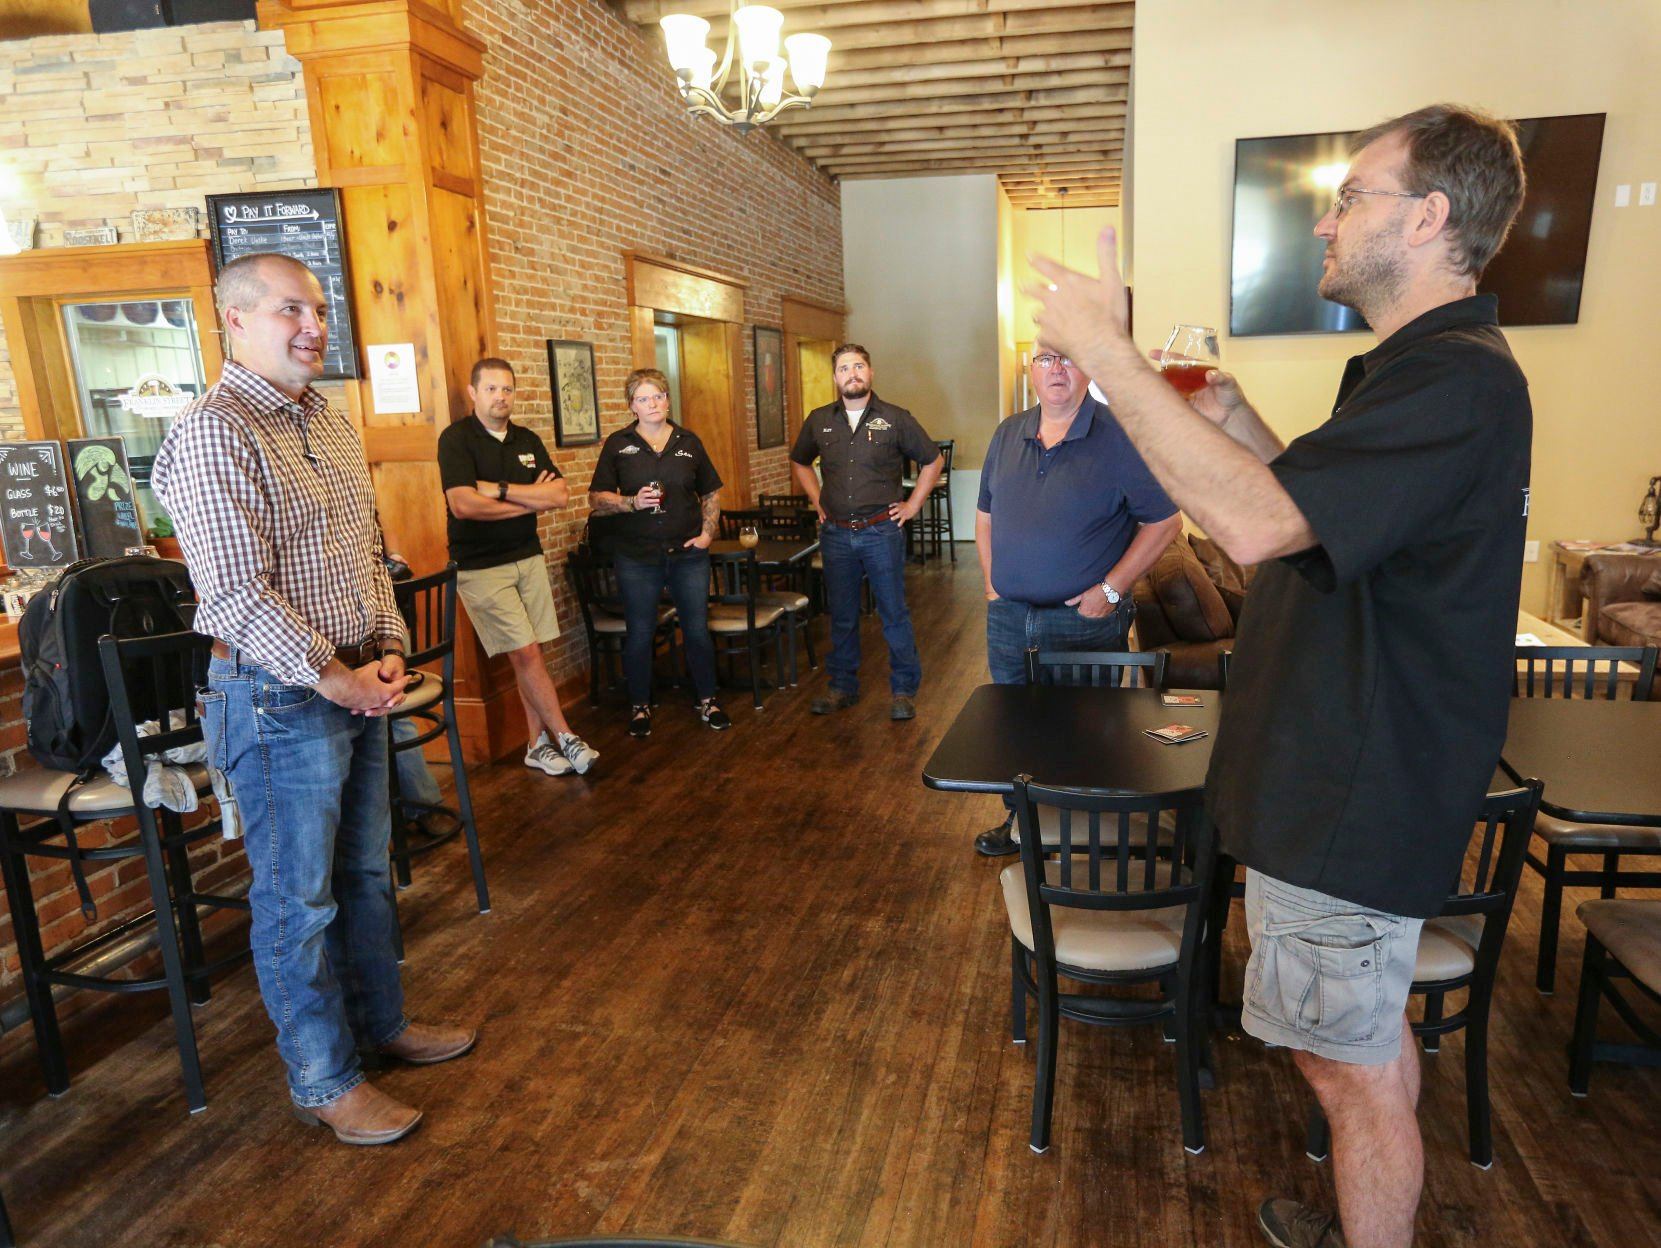 Franklin Street Brewing Company co-owner, Kyle Sands (right), speaks with Iowa Secretary of Agriculture Mike Naig who was in Manchester, Iowa on Thursday, Sept. 15 to tour the company.    PHOTO CREDIT: Dave Kettering